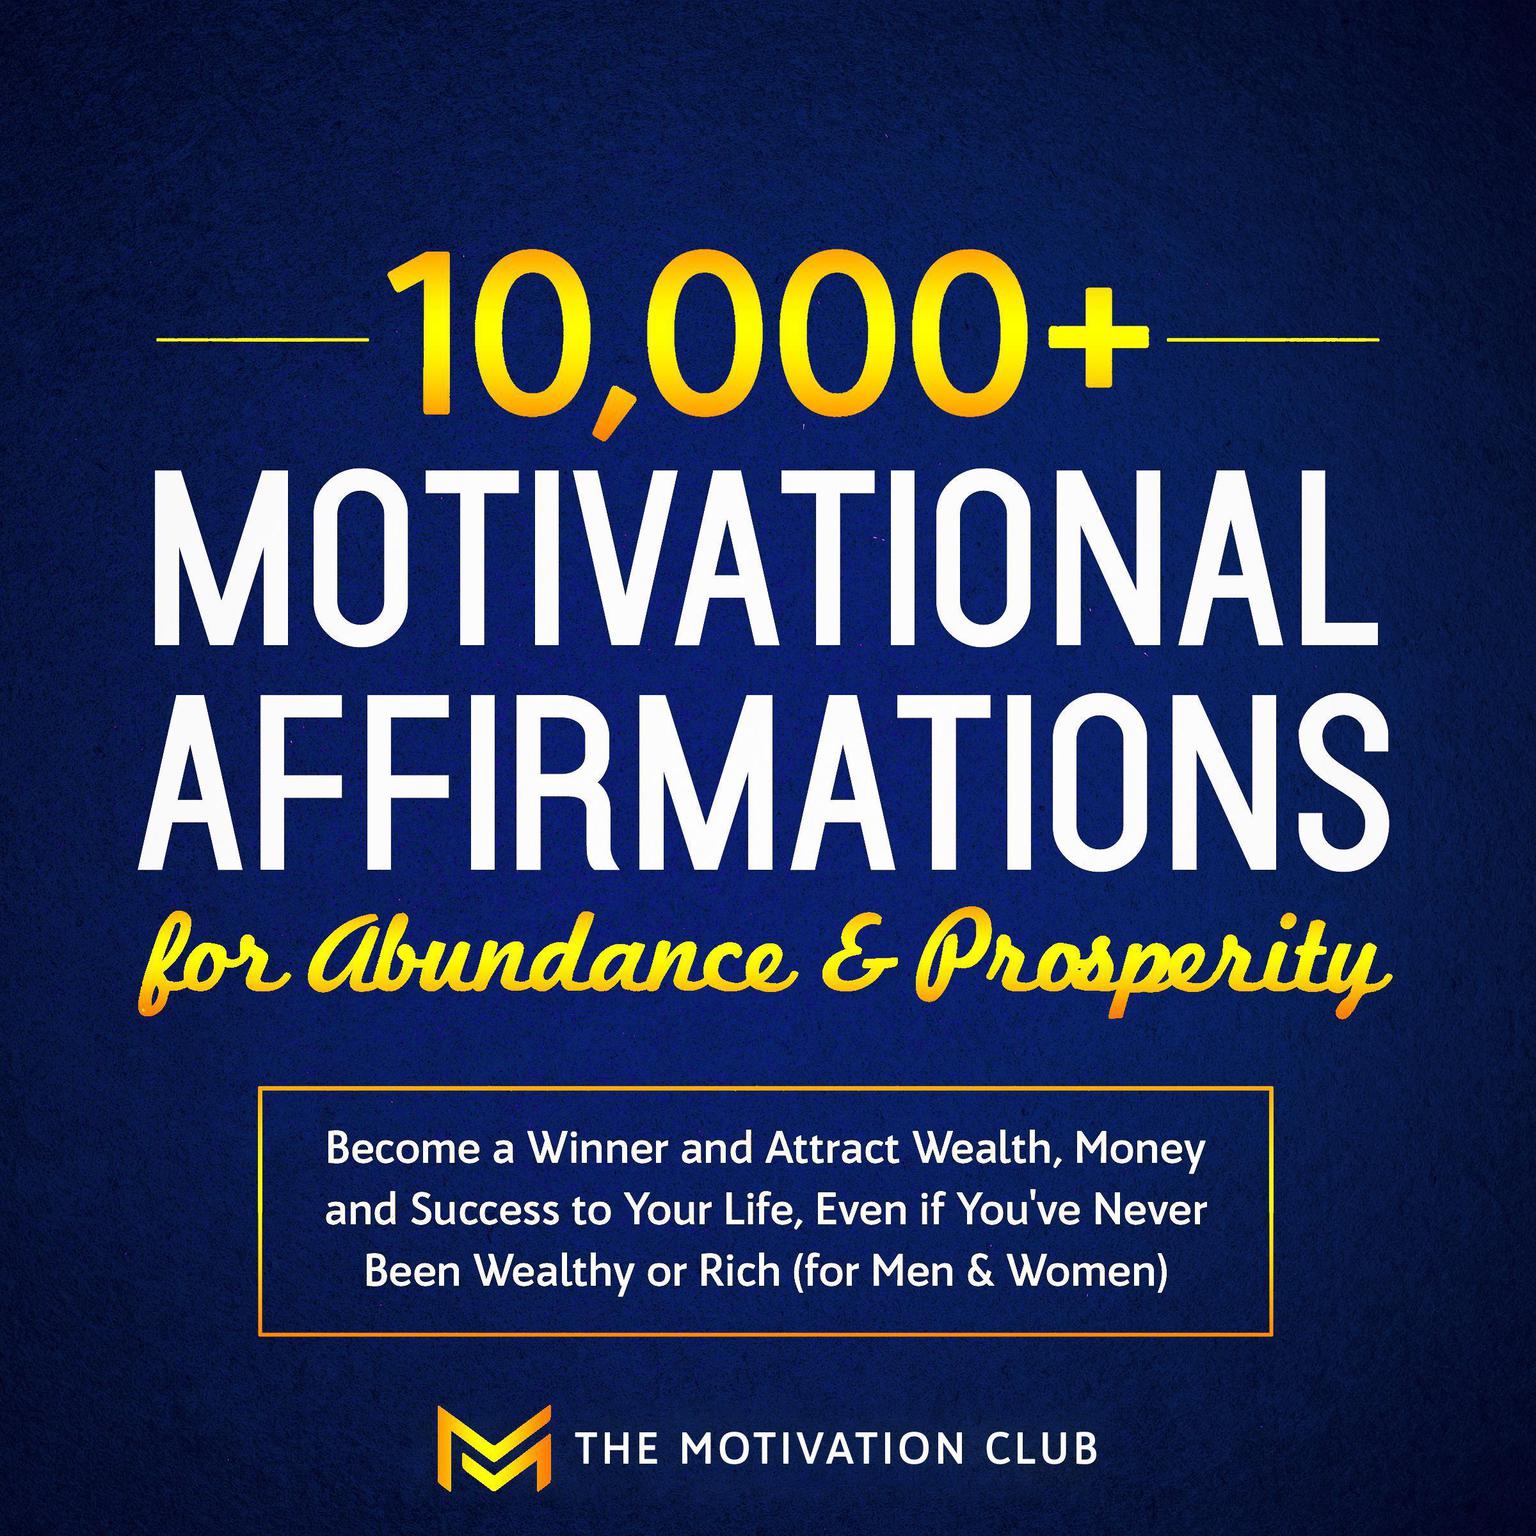 10,000+ Motivational Affirmations for Abundance and Prosperity: Become a Winner and Attract Wealth, Money and Success to Your Life Even if You’ve Never Been Wealthy or Rich (for Men & Women) Audiobook, by The Motivation Club